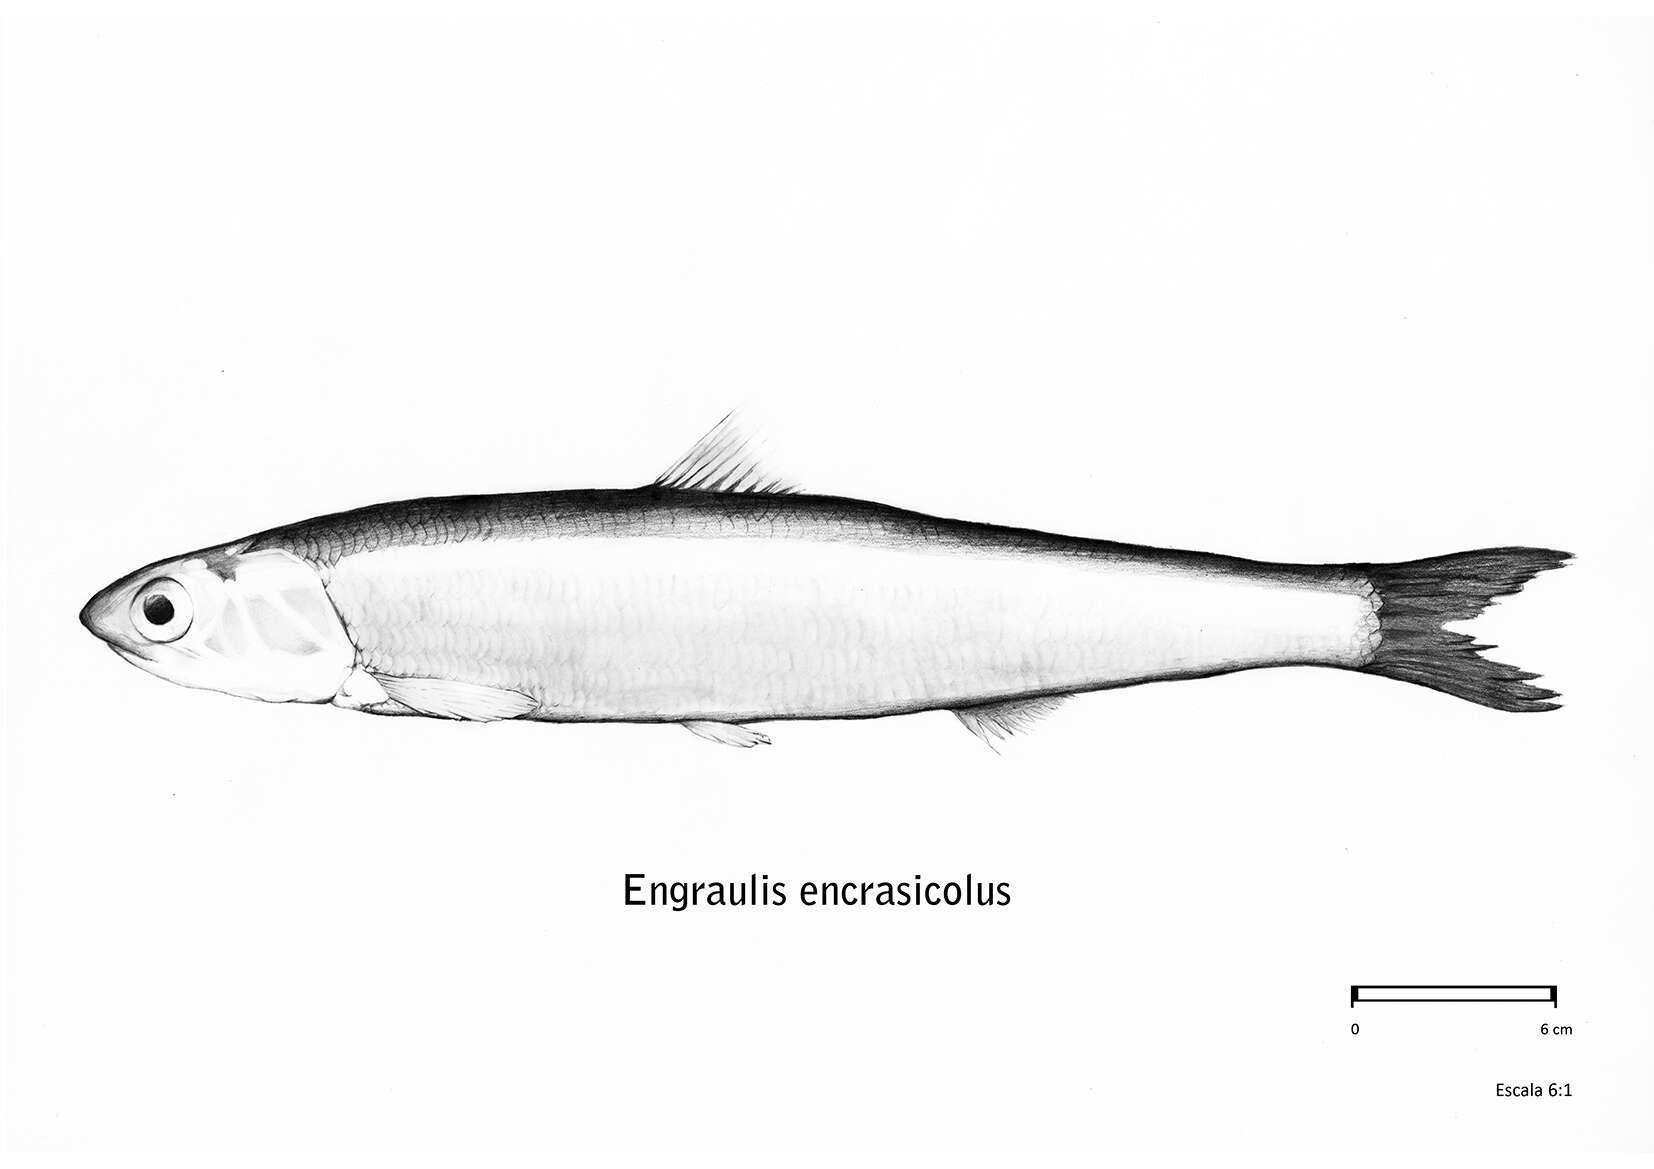 Image of Anchovy Paste